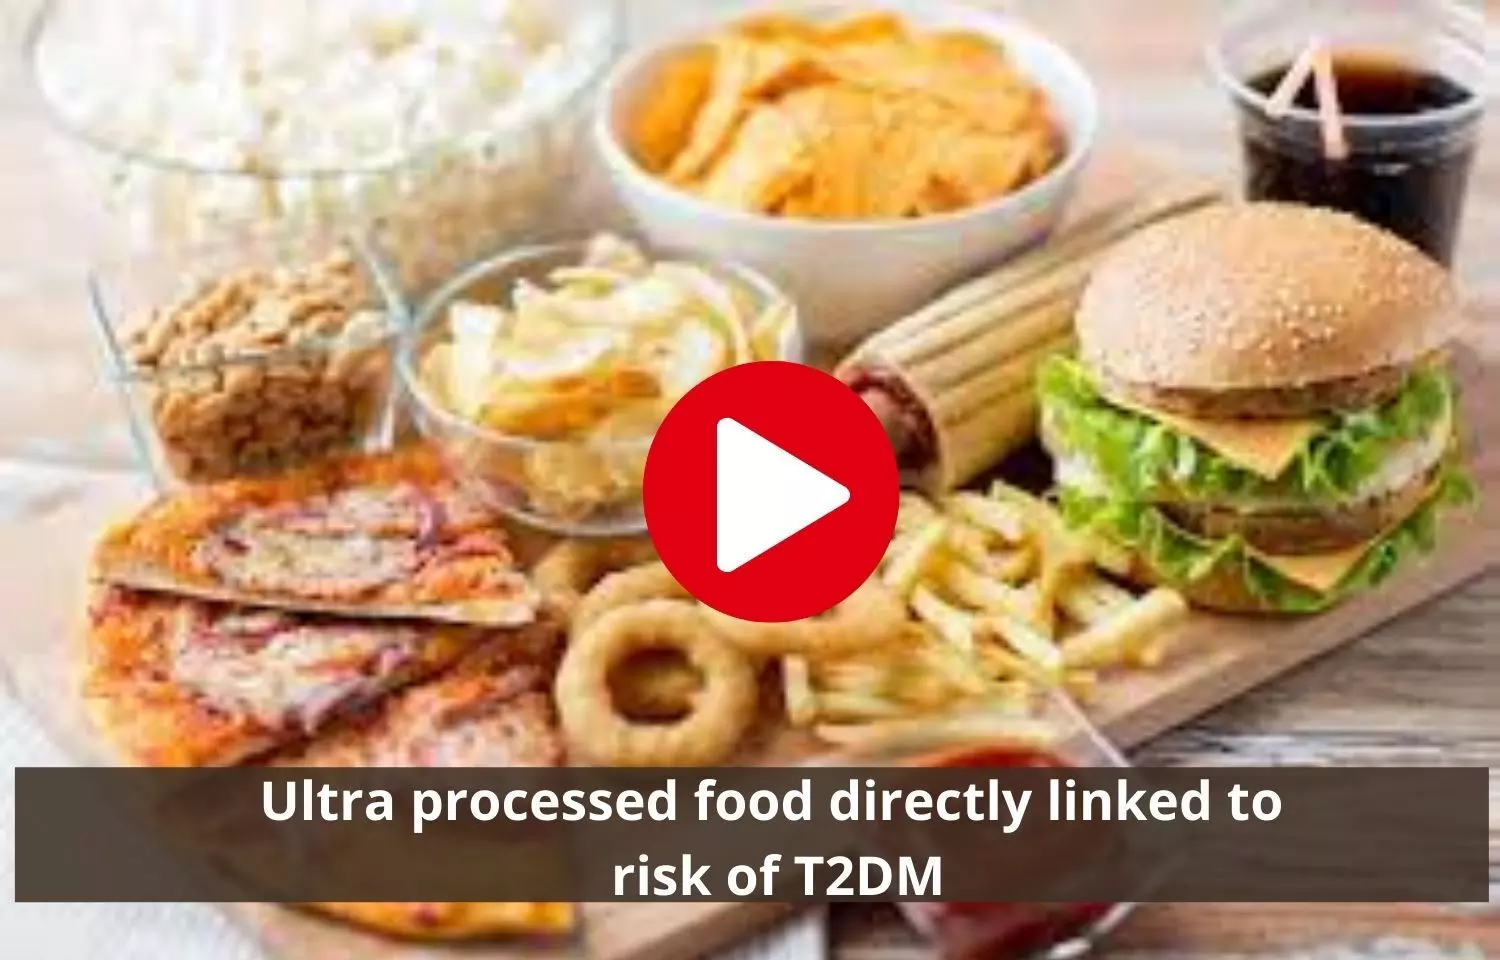 Processed food tied to higher risk of developing T2DM